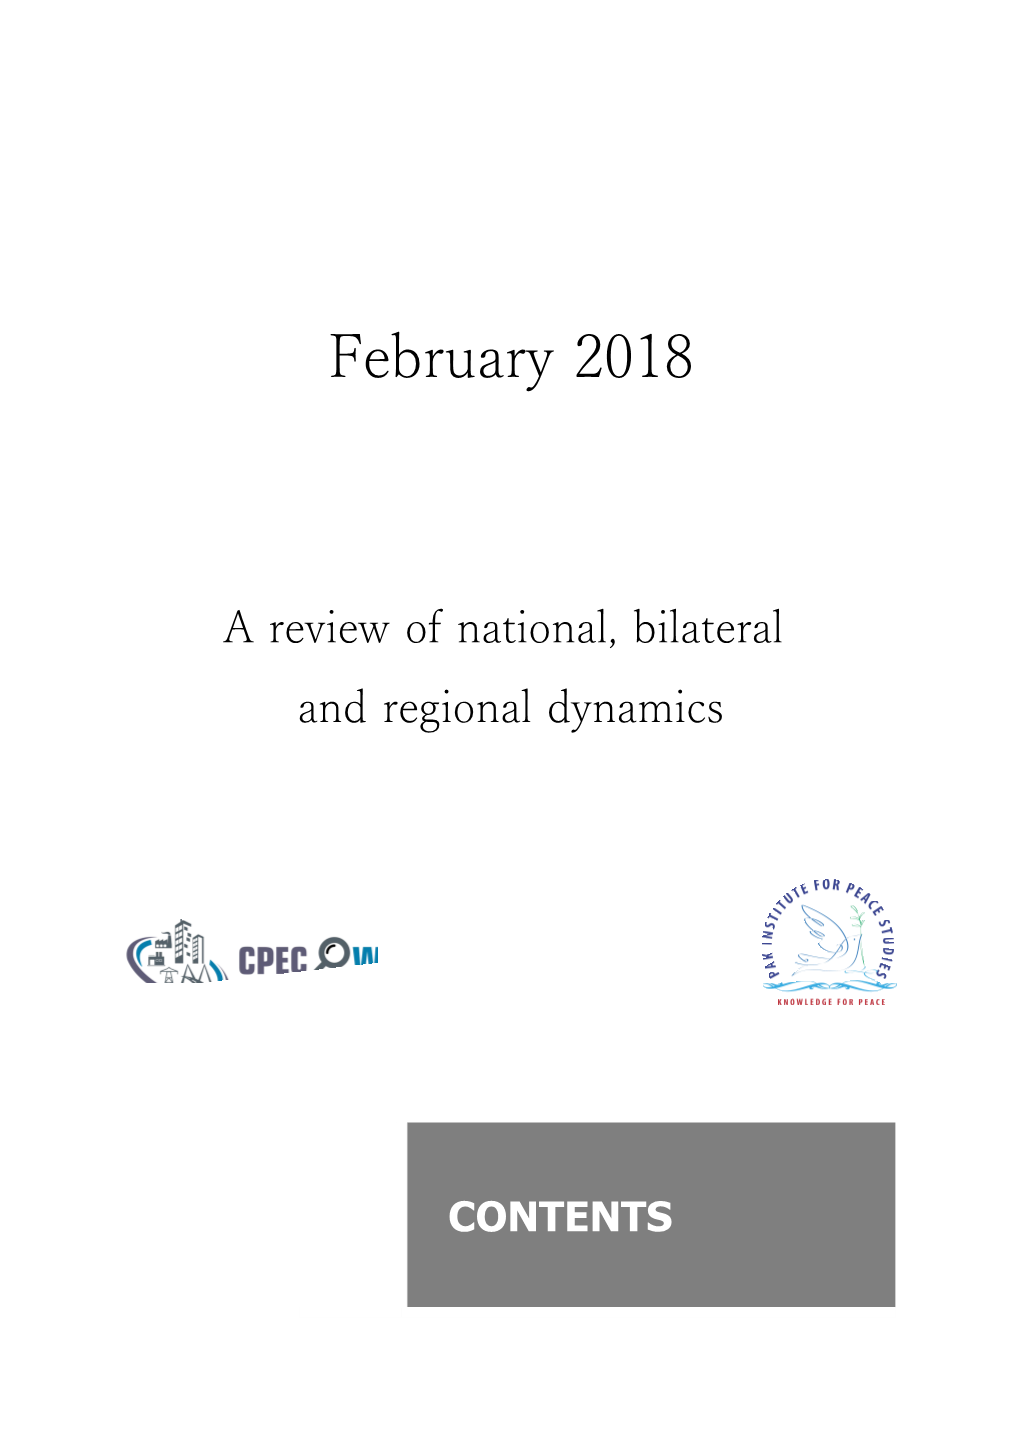 A Review of National, Bilateral and Regional Dynamics